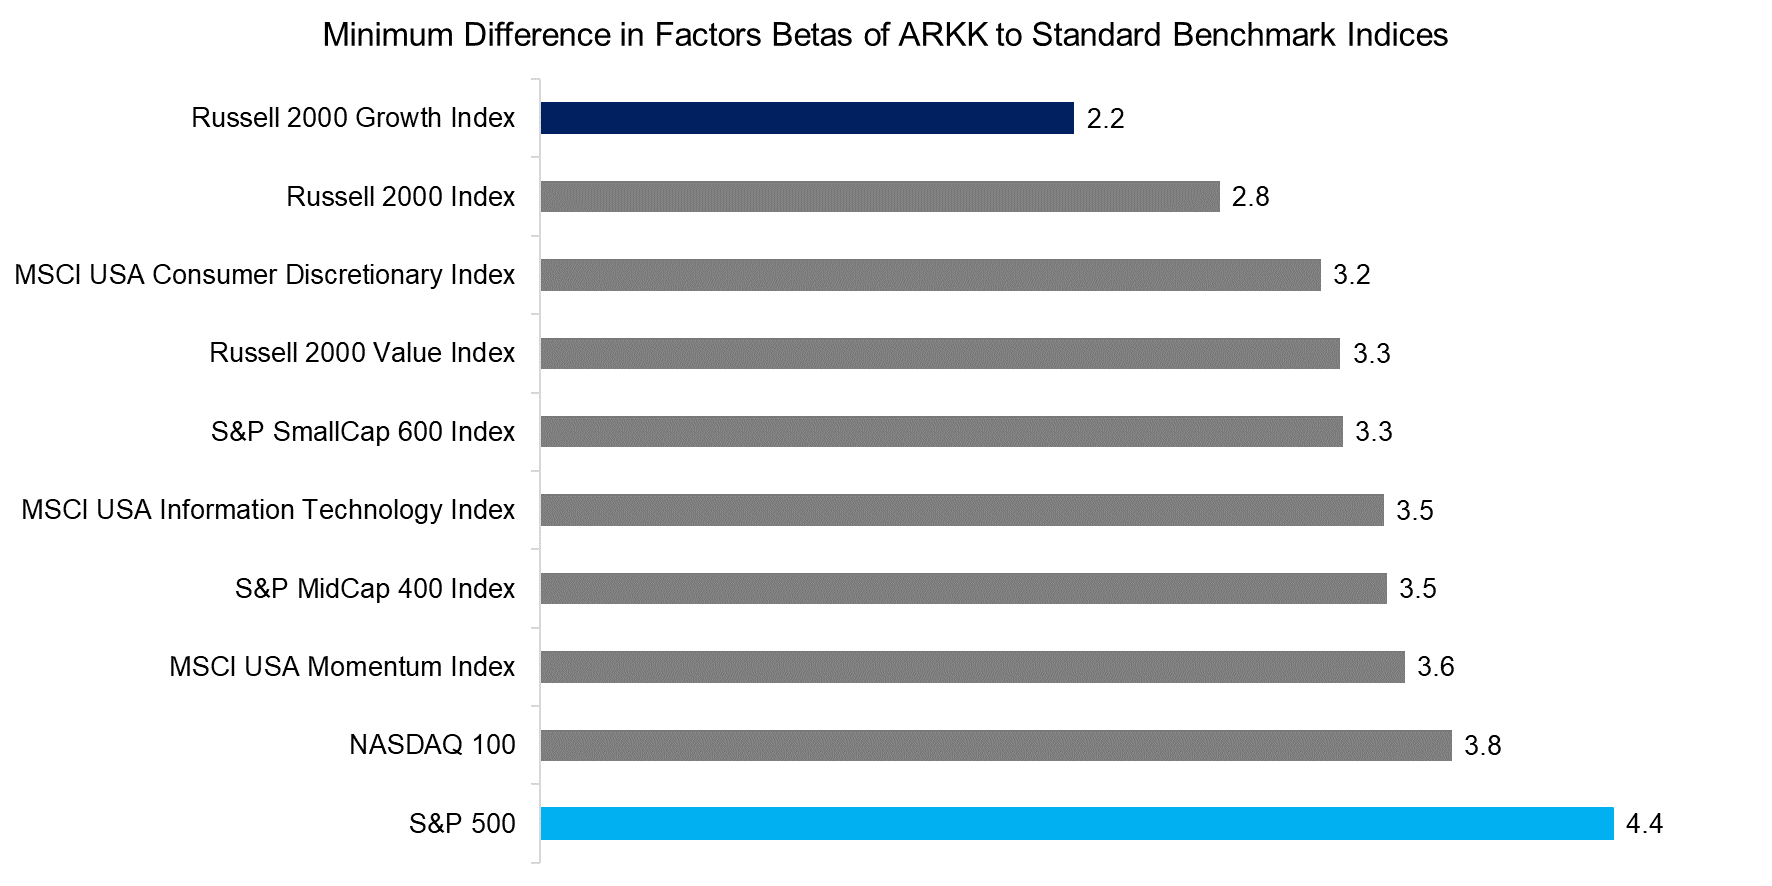 Minimum Difference in Factors Betas of ARKK to Standard Benchmark Indices